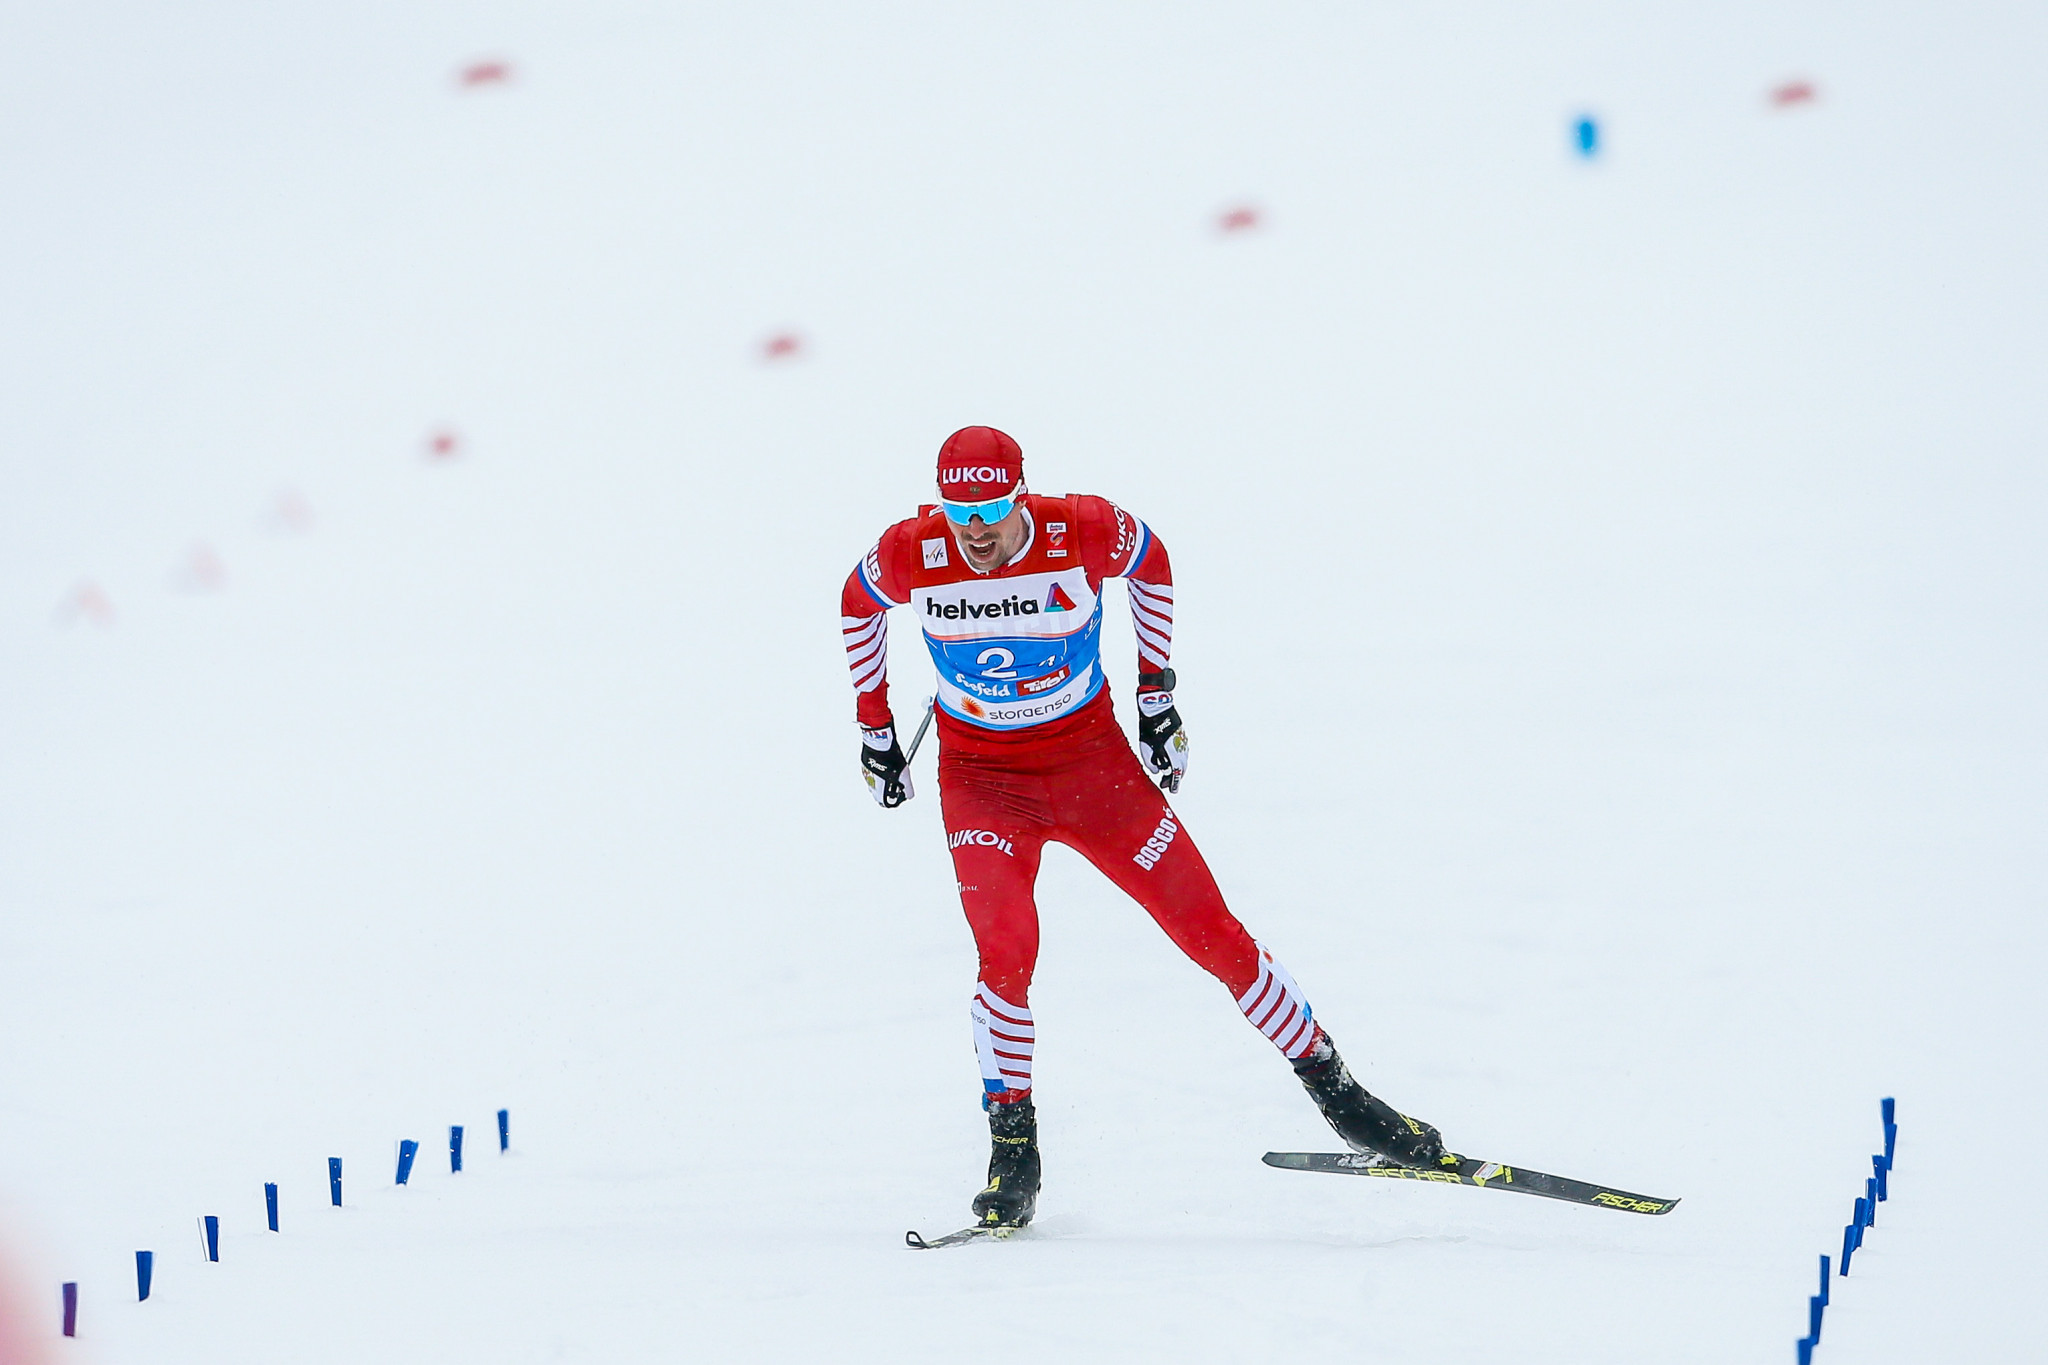 Sergey Ustiugov of Russia earned gold in the men's 15km interval start at the Tour de Ski ©Getty Images